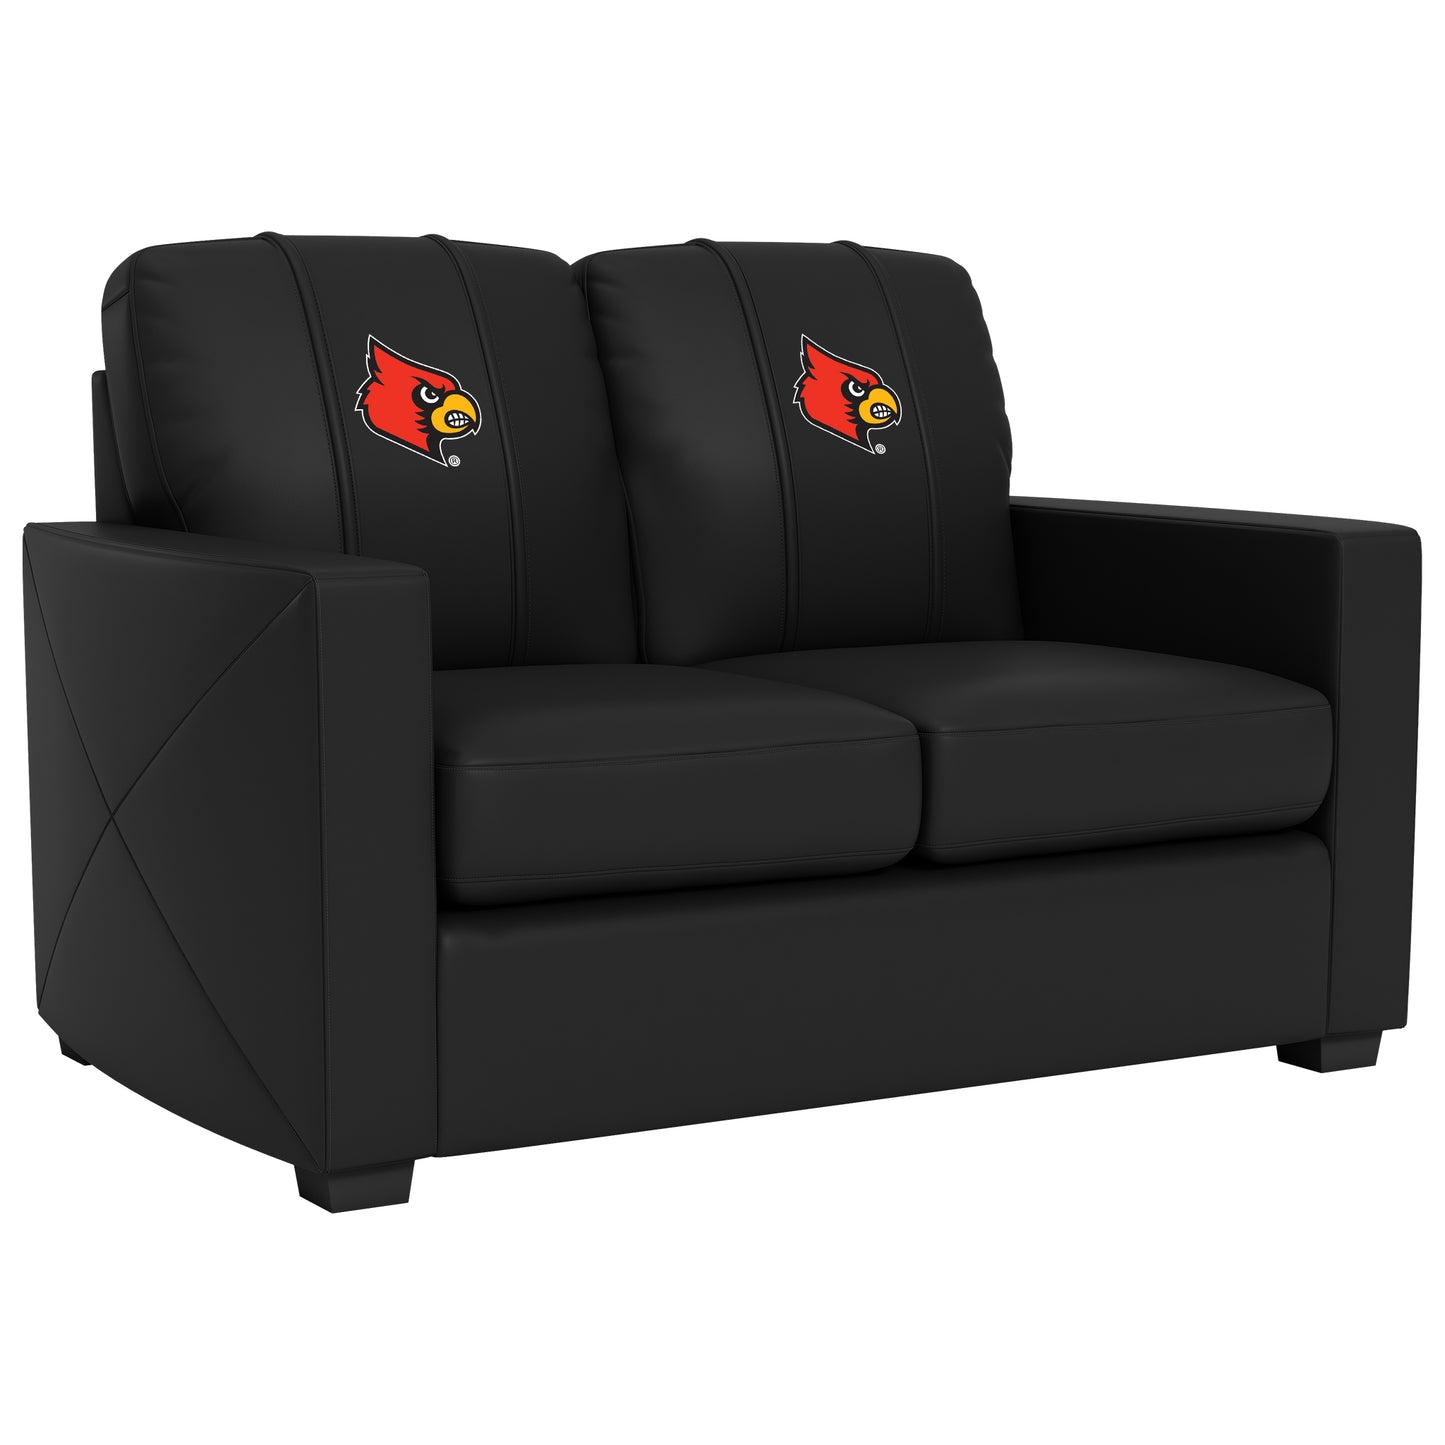 Silver Loveseat with Louisville Cardinals Logo